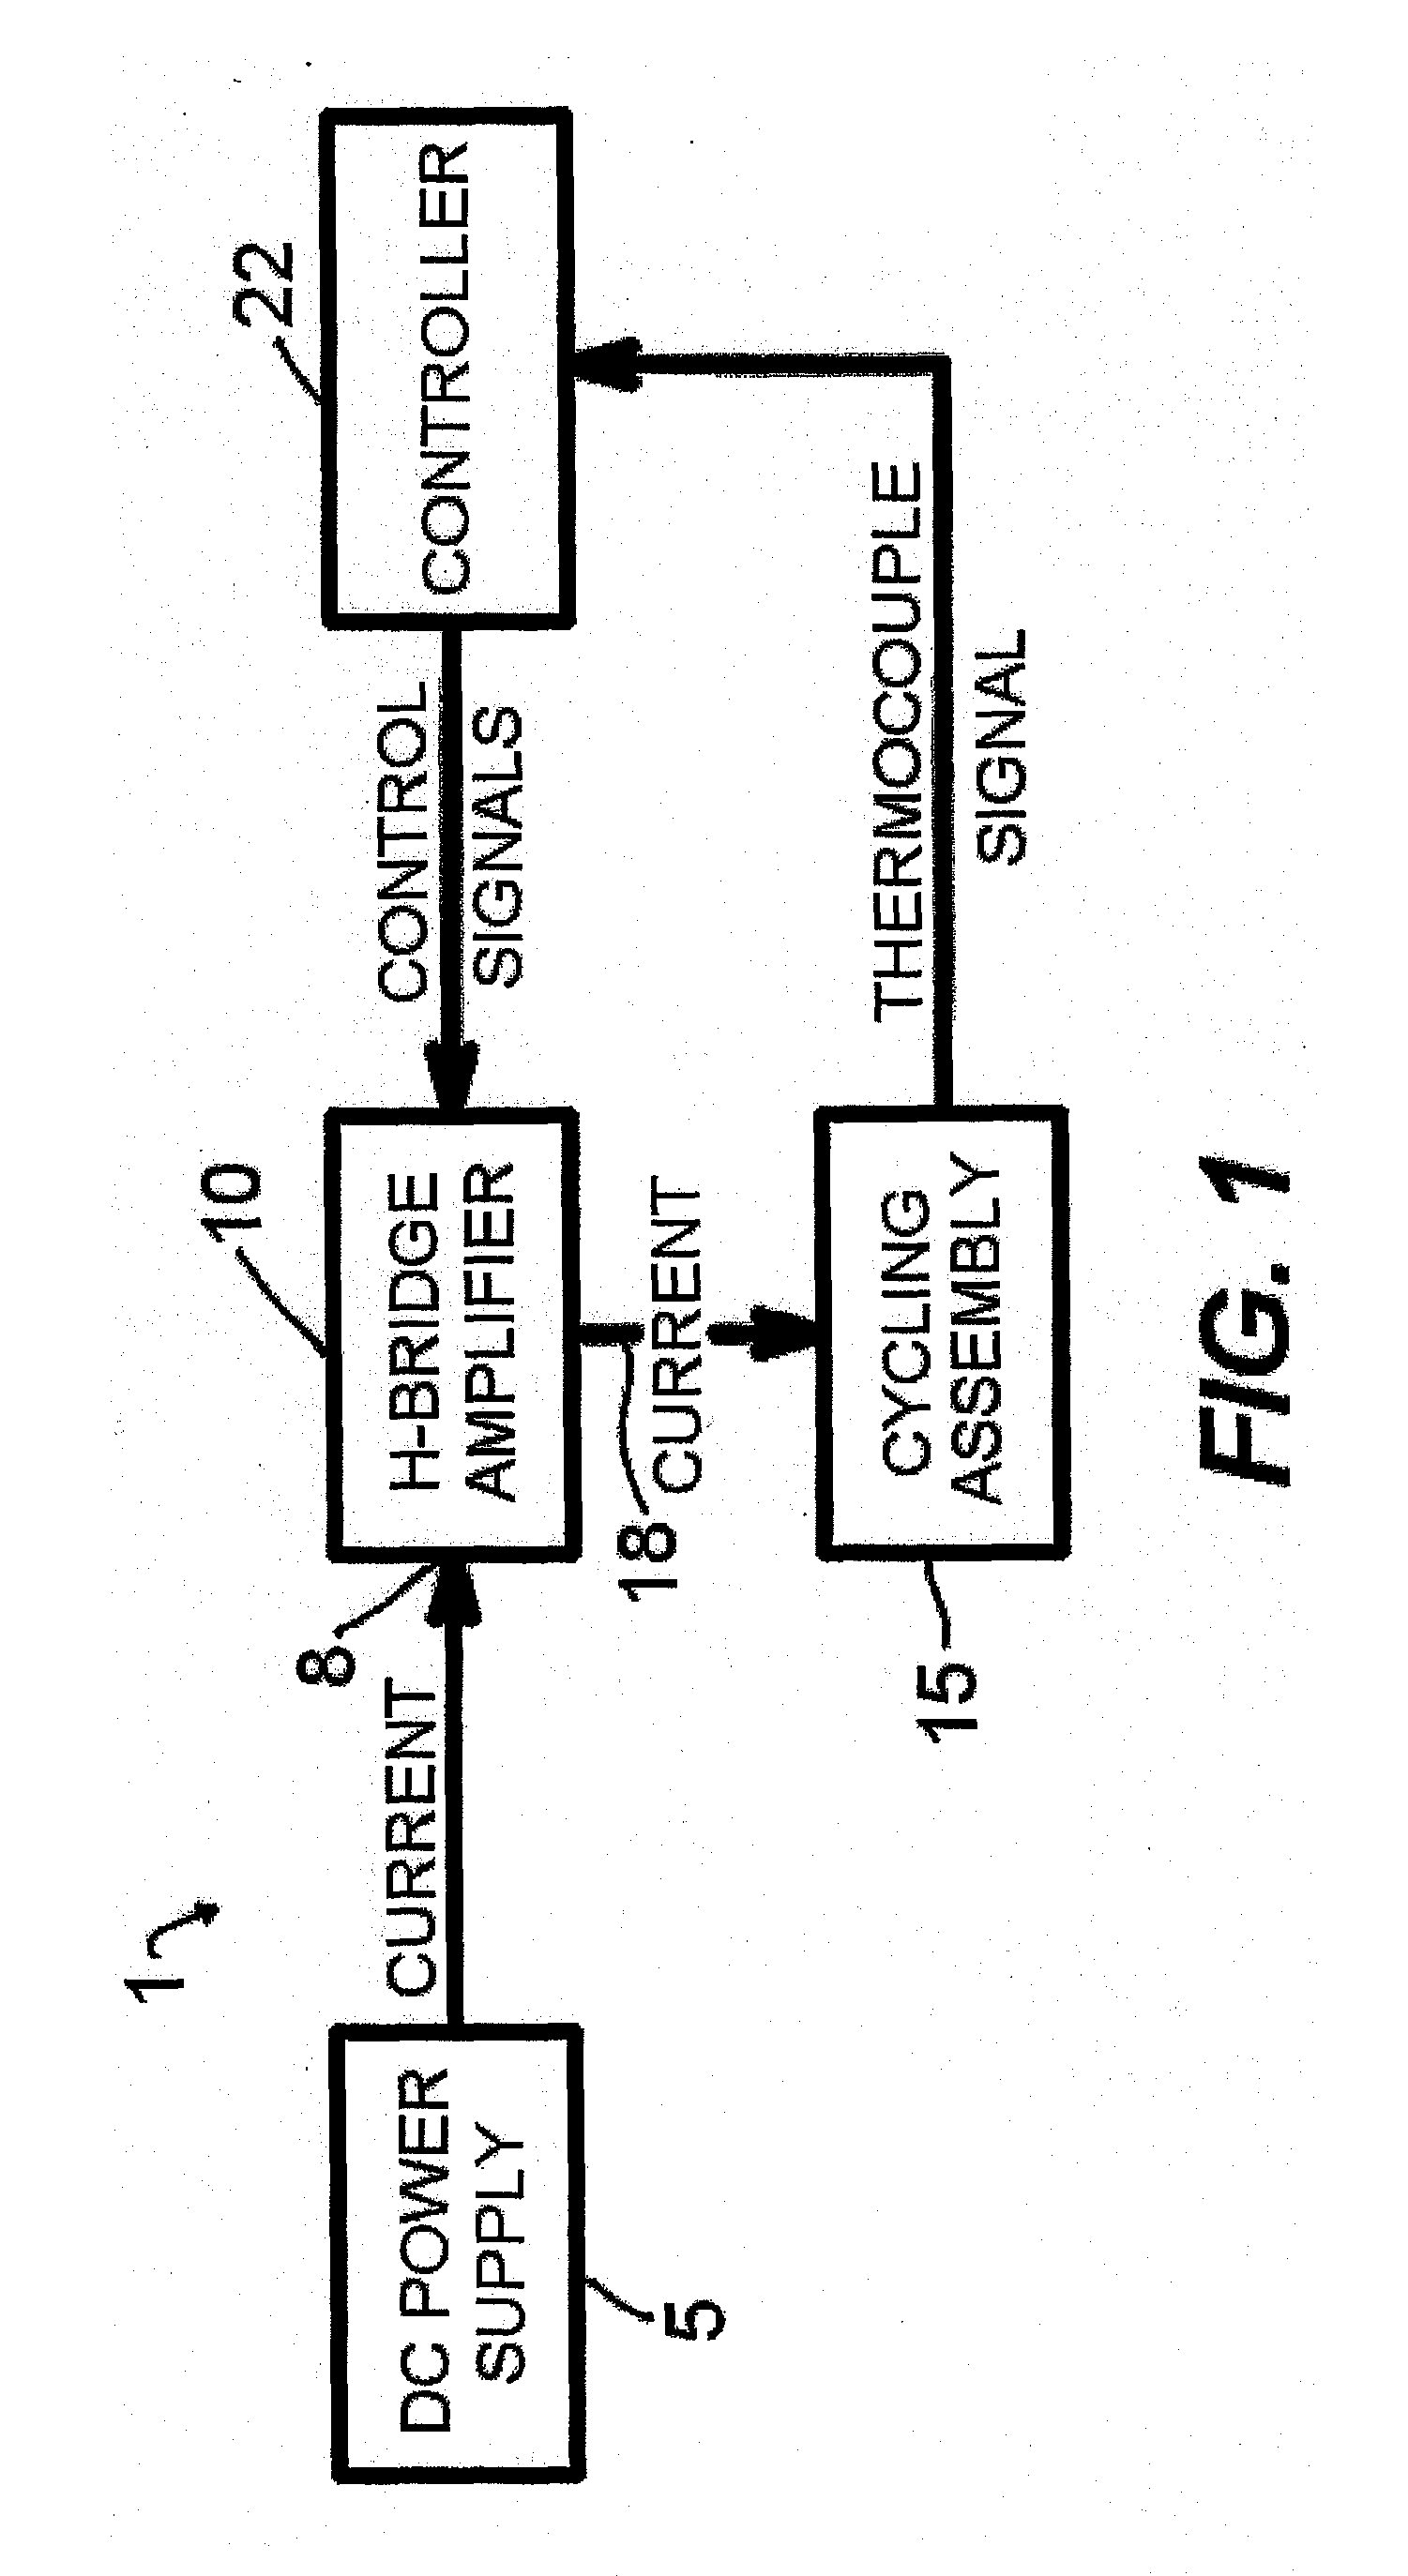 Thermocycler and sample vessel for rapid amplification of DNA